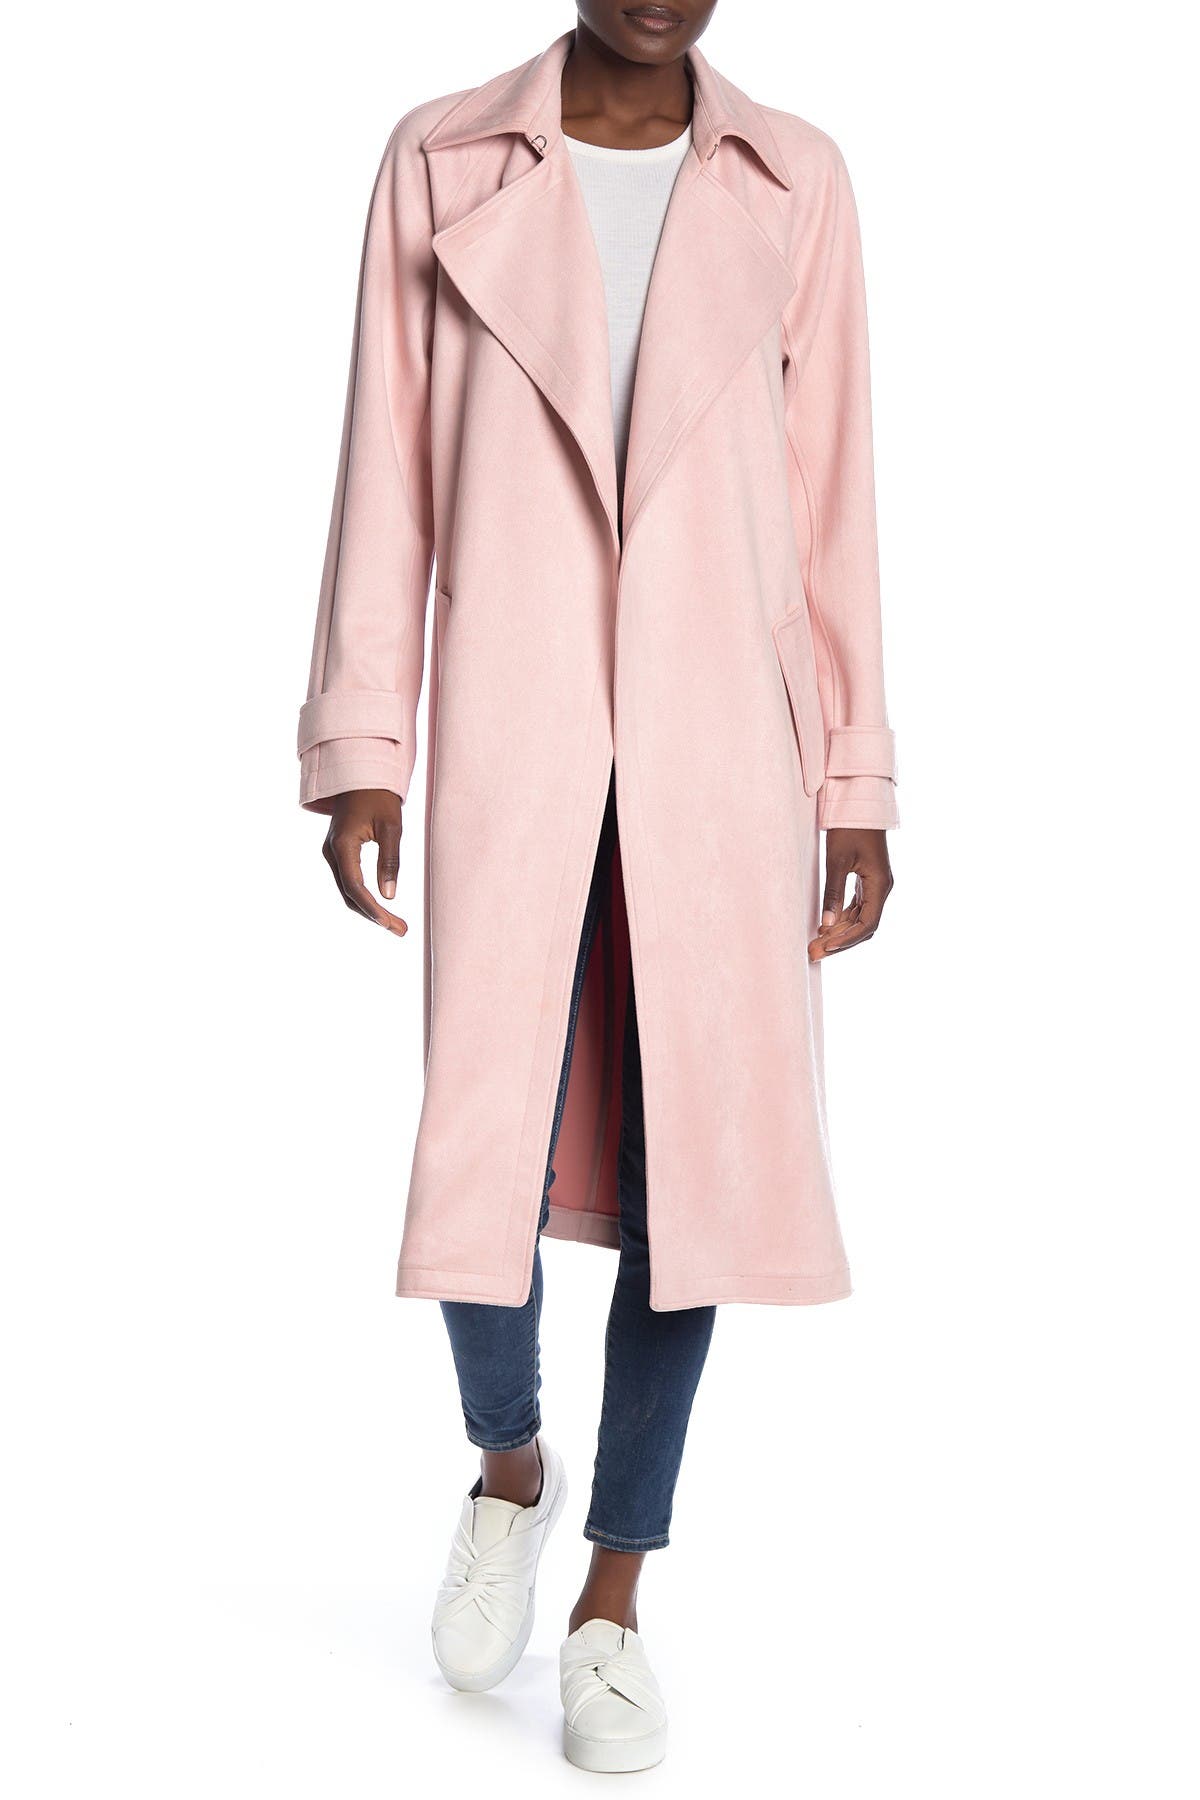 Bagatelle | Faux Suede Open Front Draped Trench Coat | Nordstrom Rack